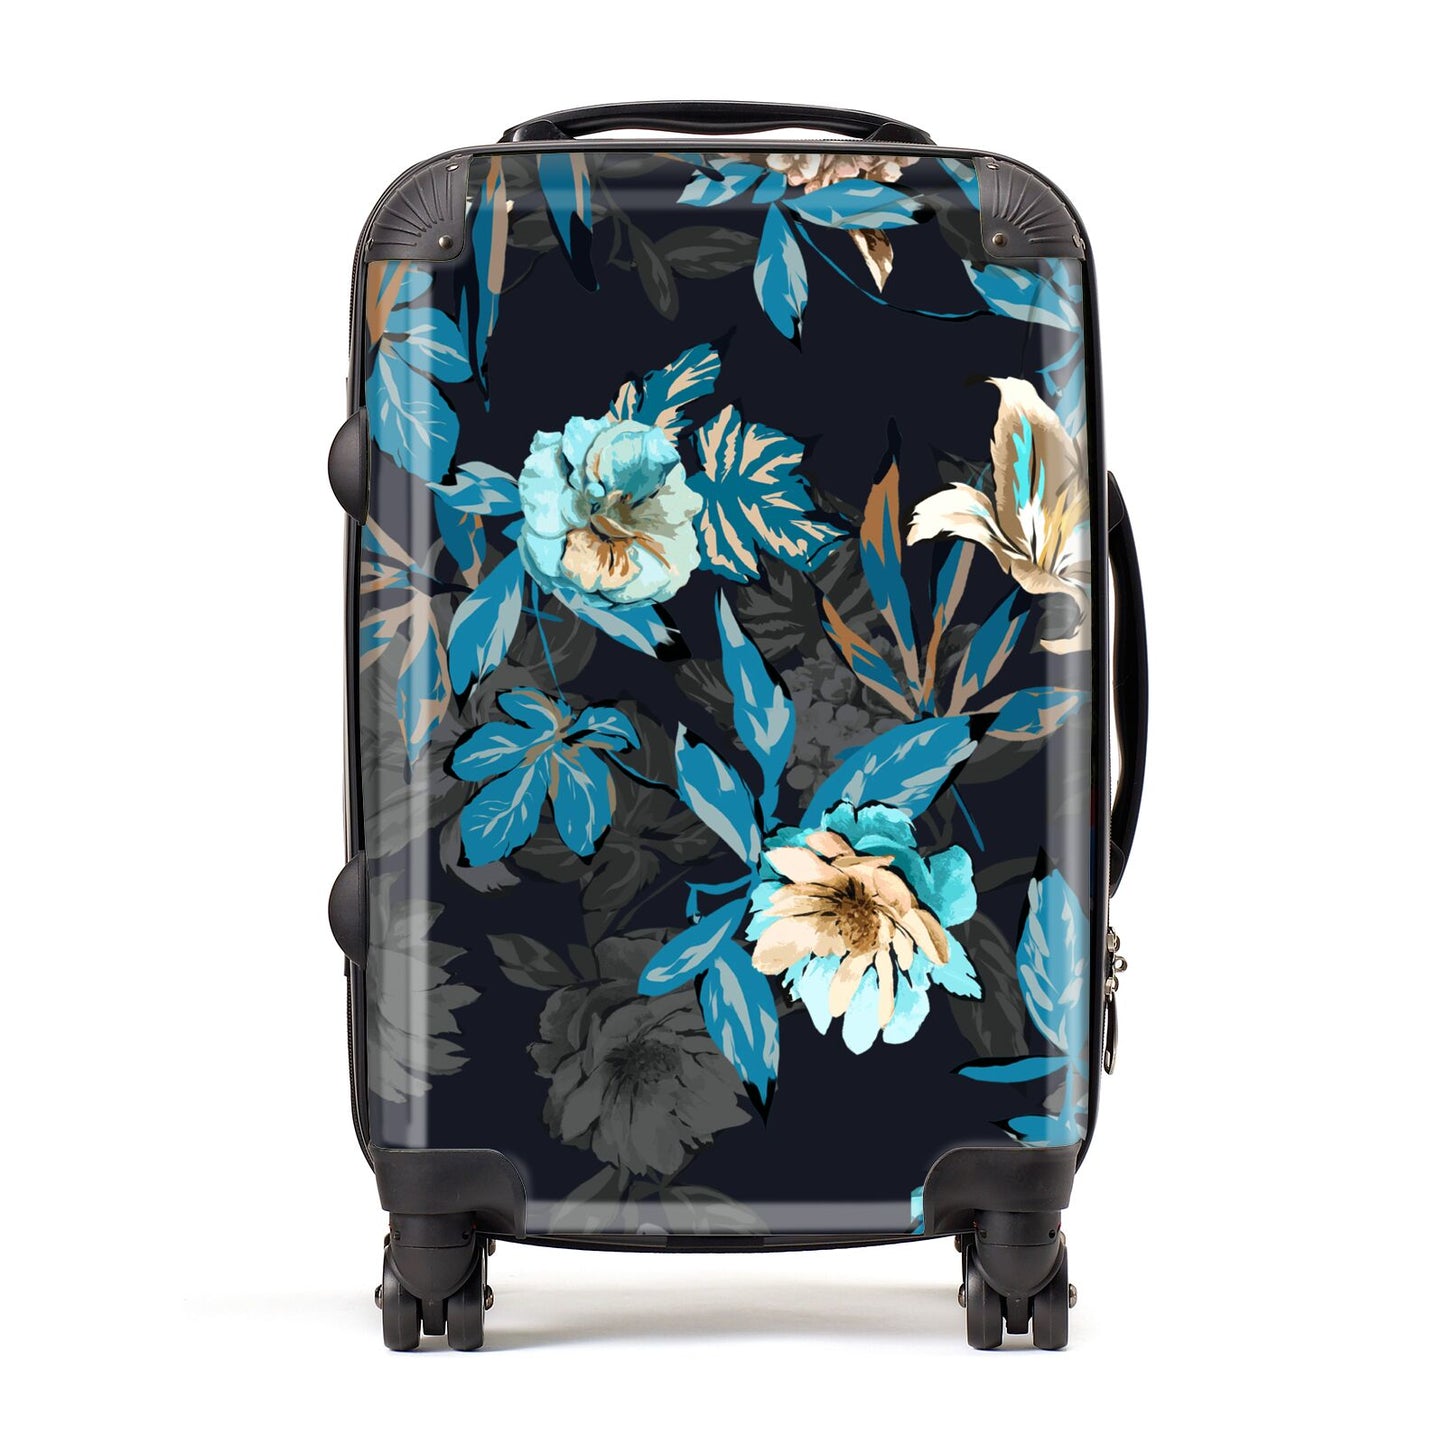 Blossom Flowers Suitcase